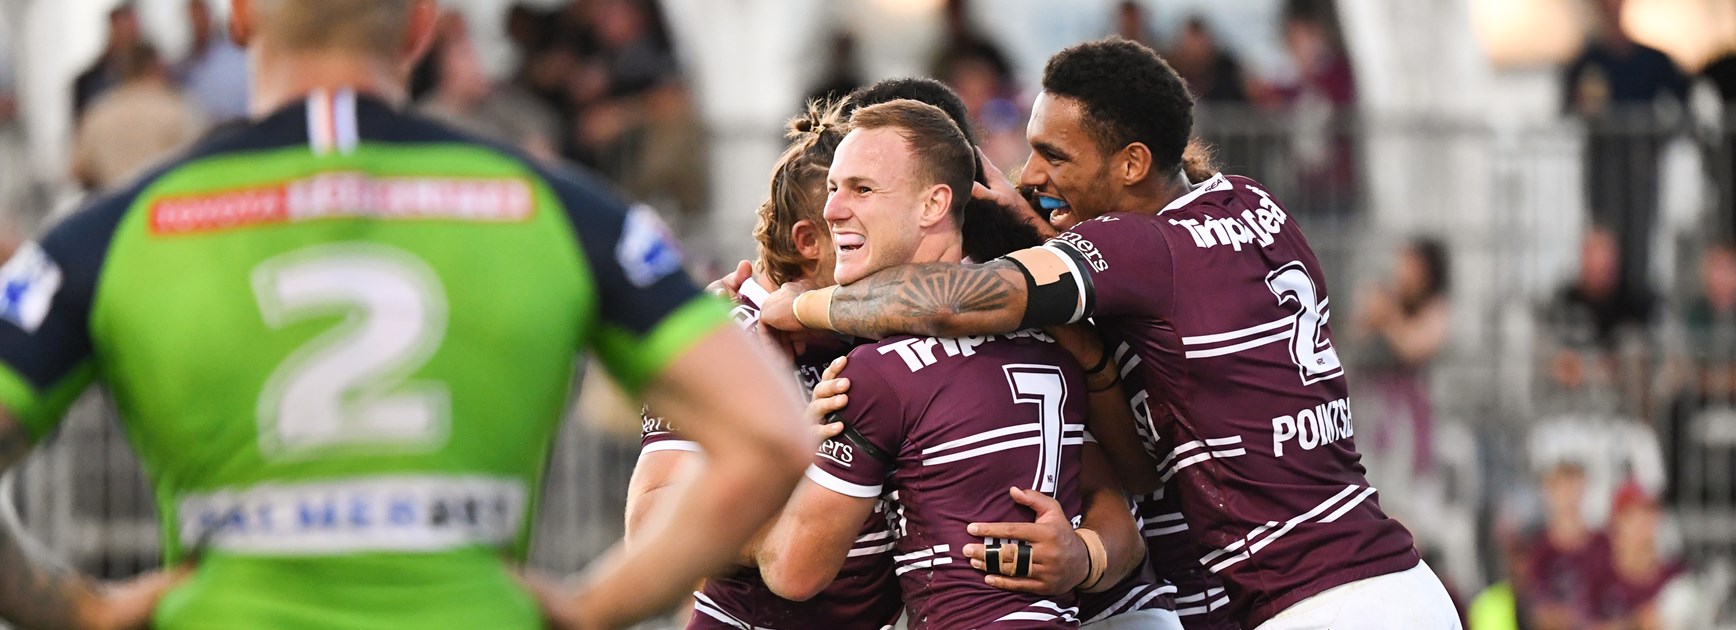 Sea Eagles return to Mudgee for another home game